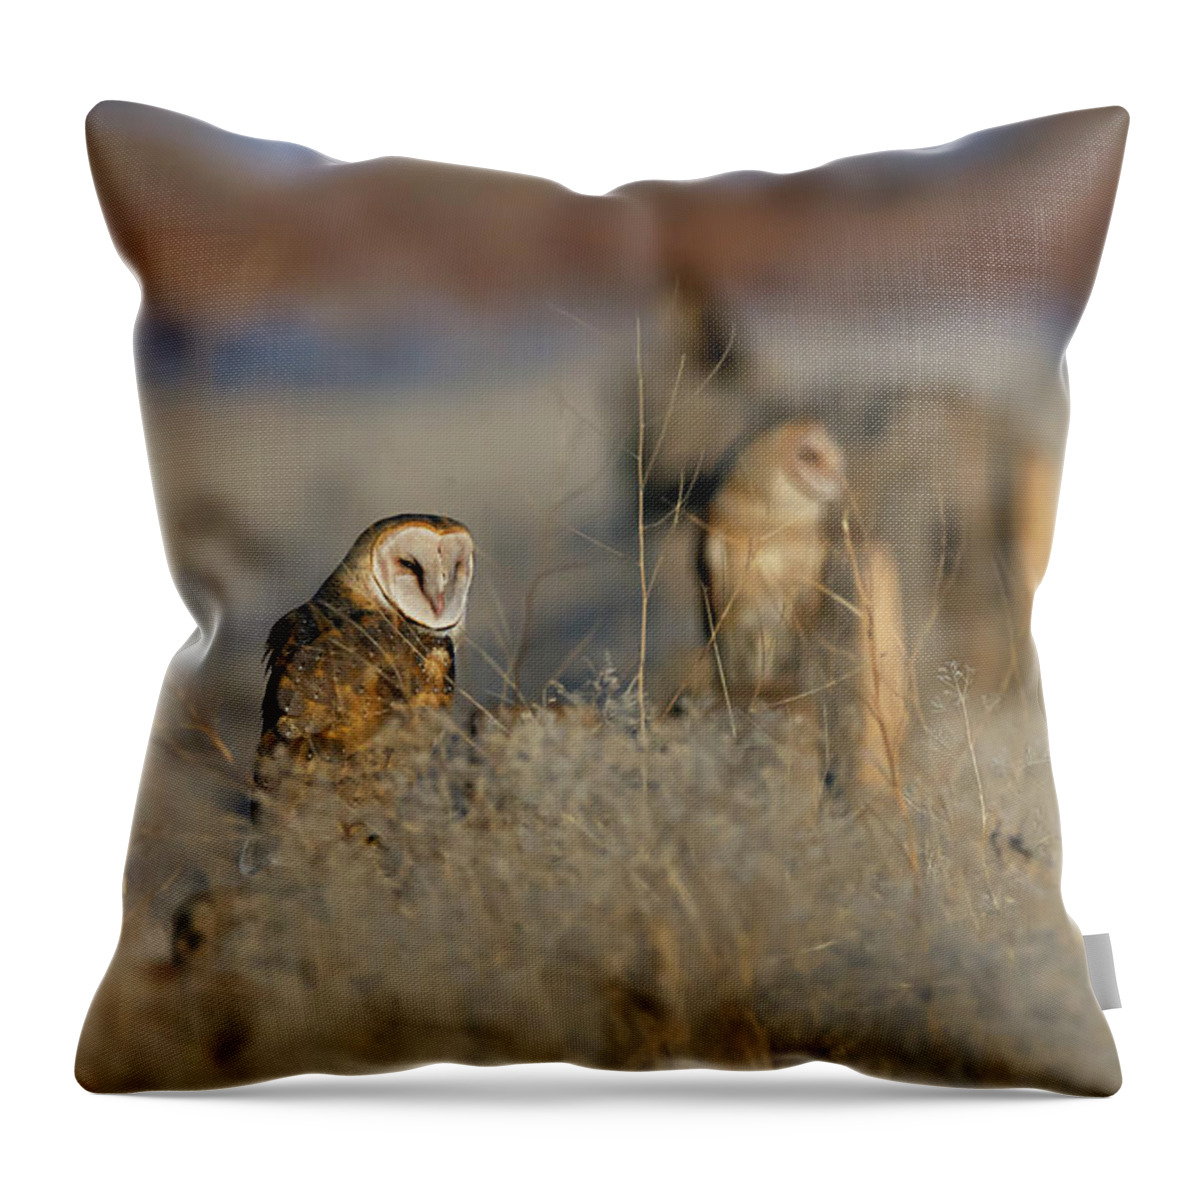 Barn Owl Throw Pillow featuring the photograph Barn Owls 9 by Rick Mosher